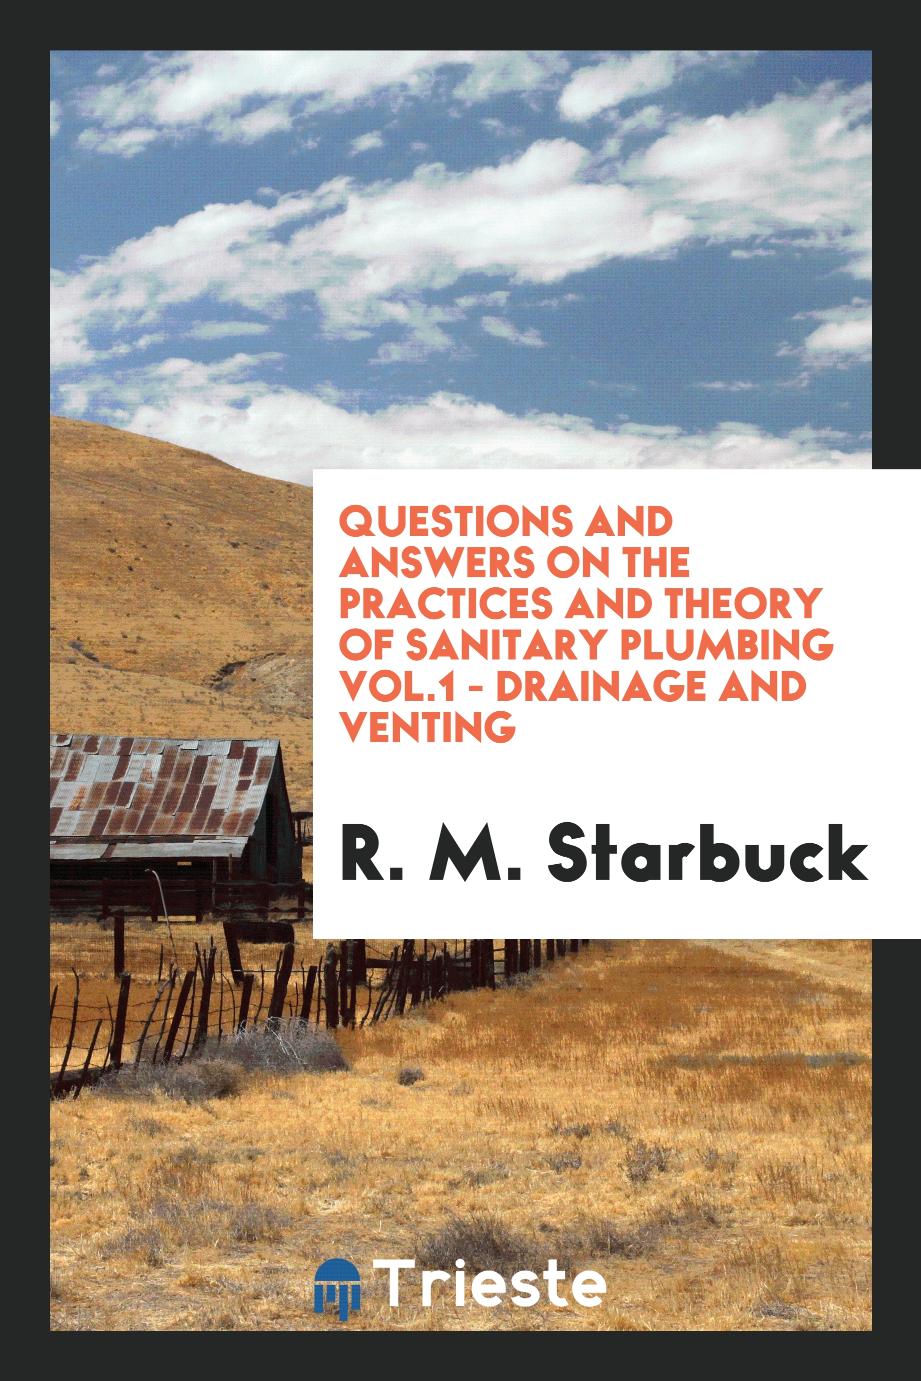 Questions and Answers on the Practices and Theory of Sanitary Plumbing Vol.1 - Drainage and Venting